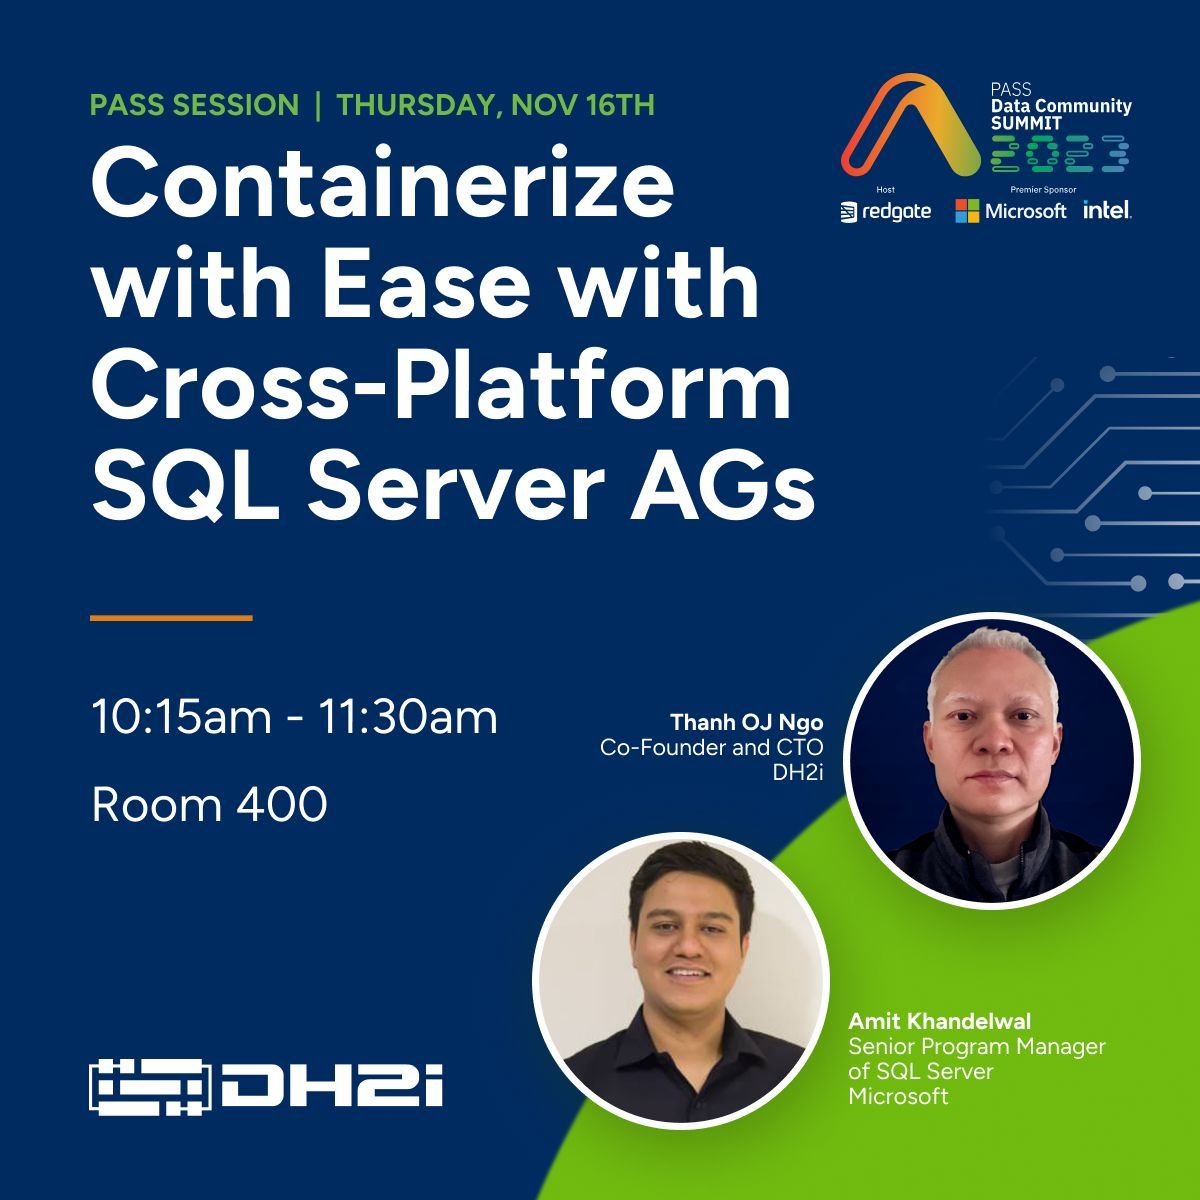 Much like #VirtualMachines, #SQLServer container use is growing rapidly. While the benefits are clear, #HighAvailability remains an obstacle. Join DH2i for a session at #PASSDataSummit where we'll explore and demo how to break through this constraint. 
 buff.ly/3tX6CXM